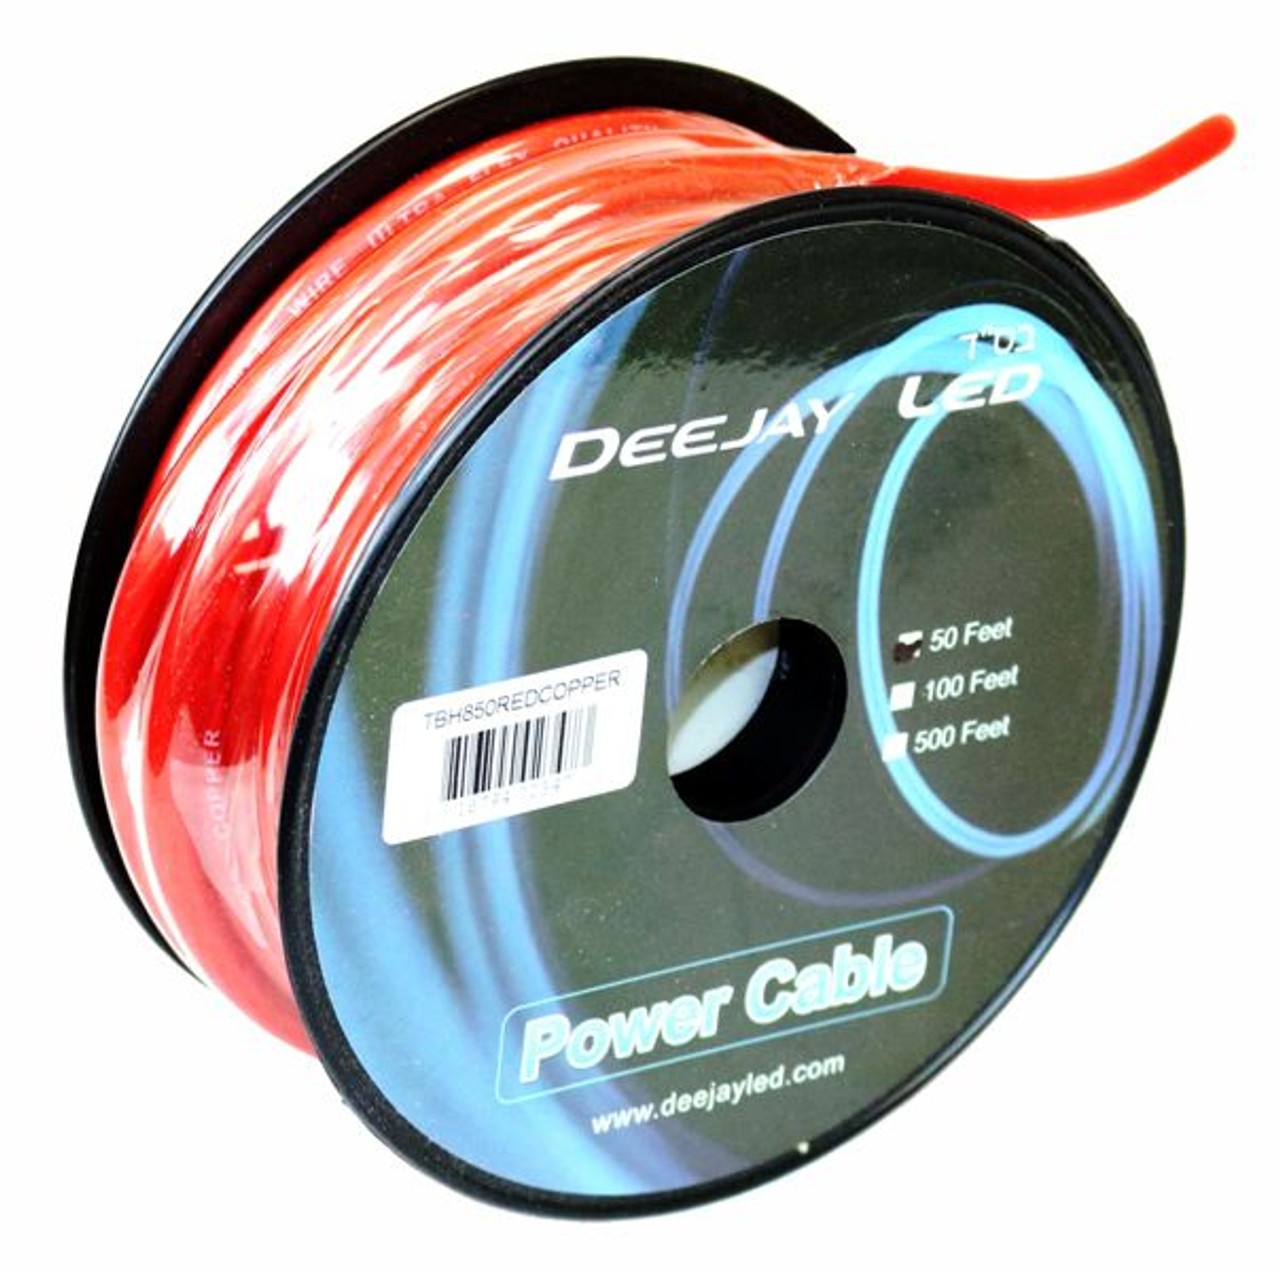 DEEJAY LED TBH850REDCOPPER - 8-Gauge 50 Foot Red Pure Copper